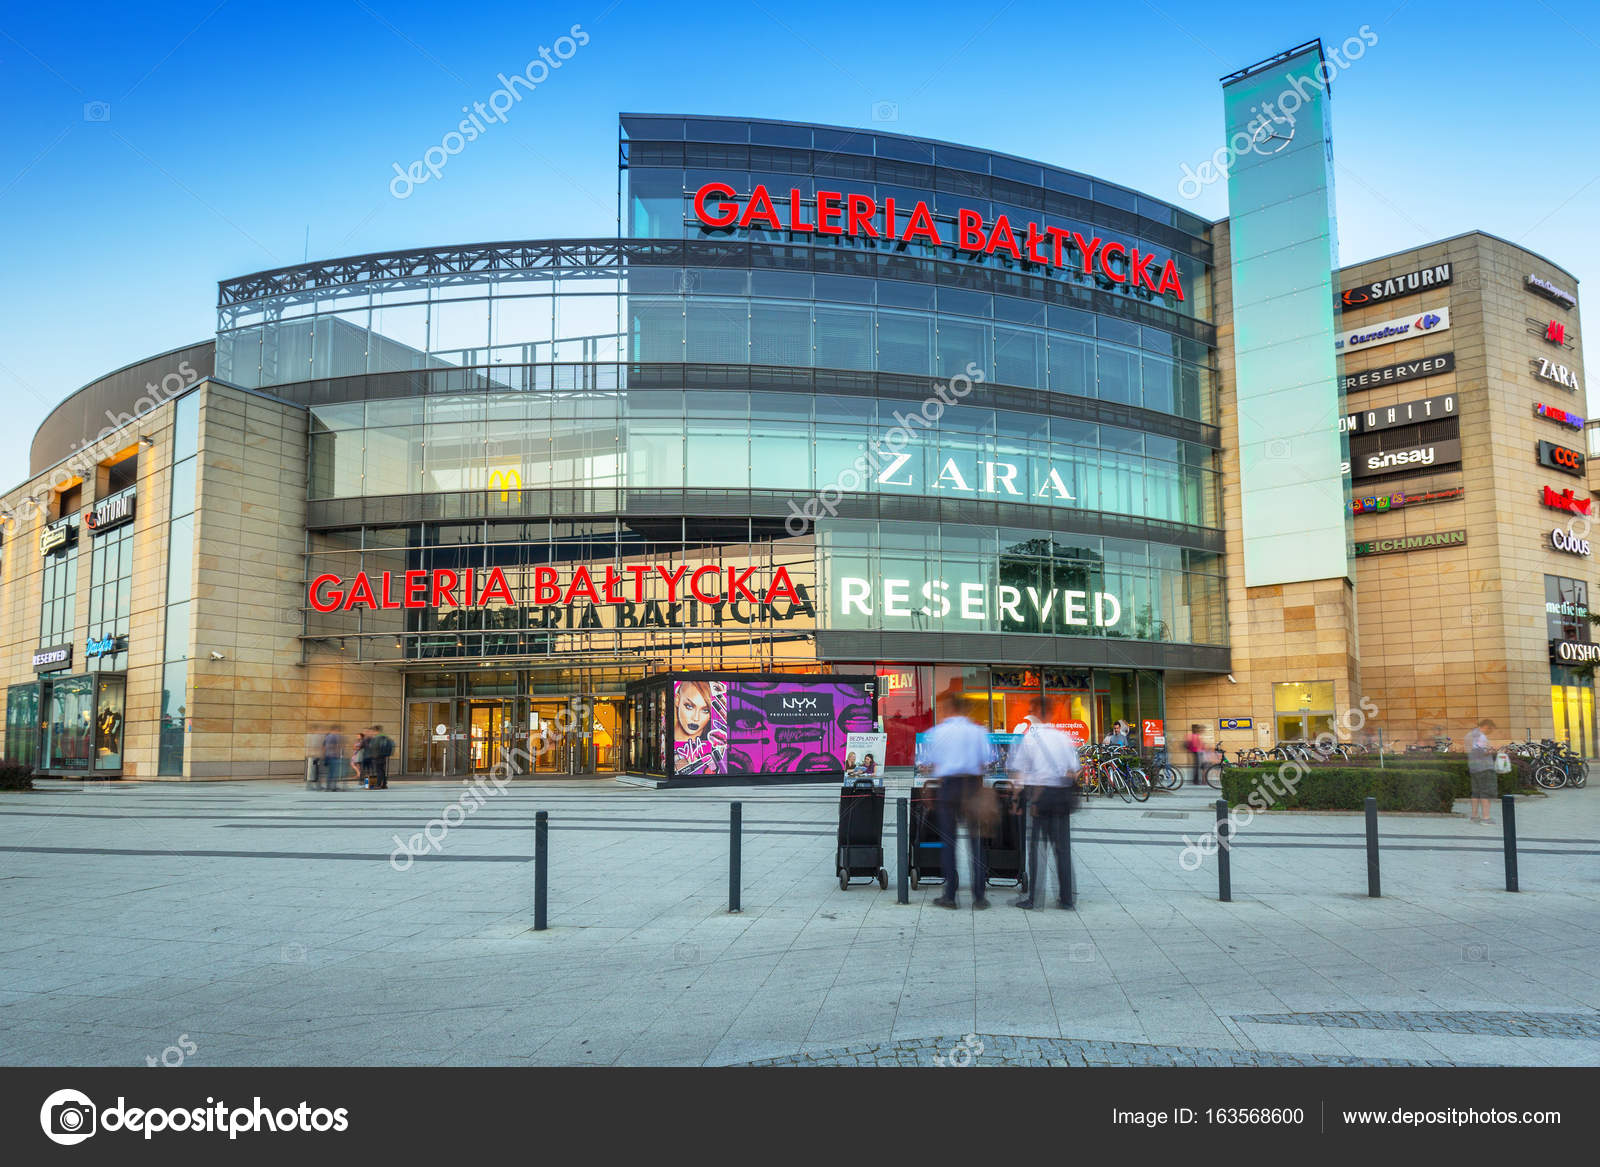 Galeria in Gdansk - Wrzeszcz at sunset, Poland – Stock Editorial Photo © #163568600